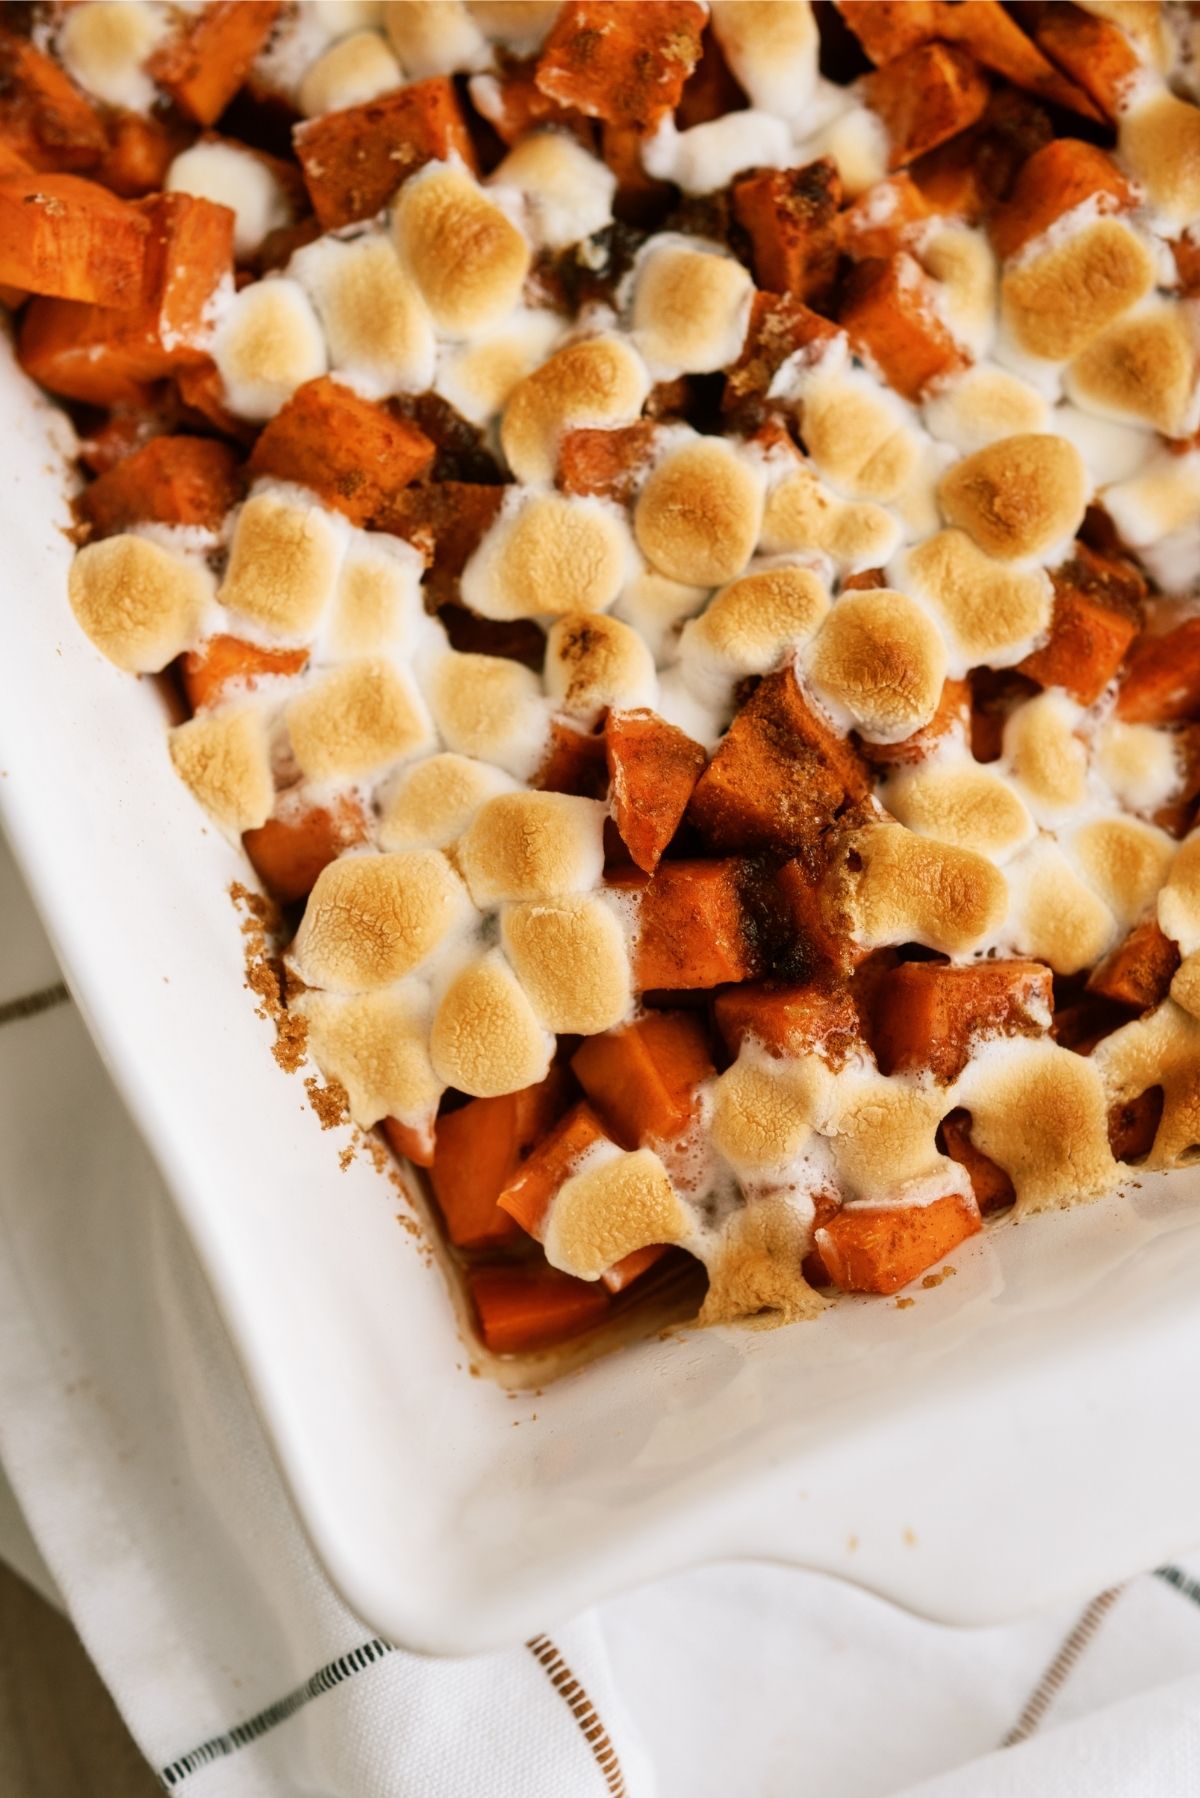 Baked Candied Yams without Corn Syrup in 9x13 pan